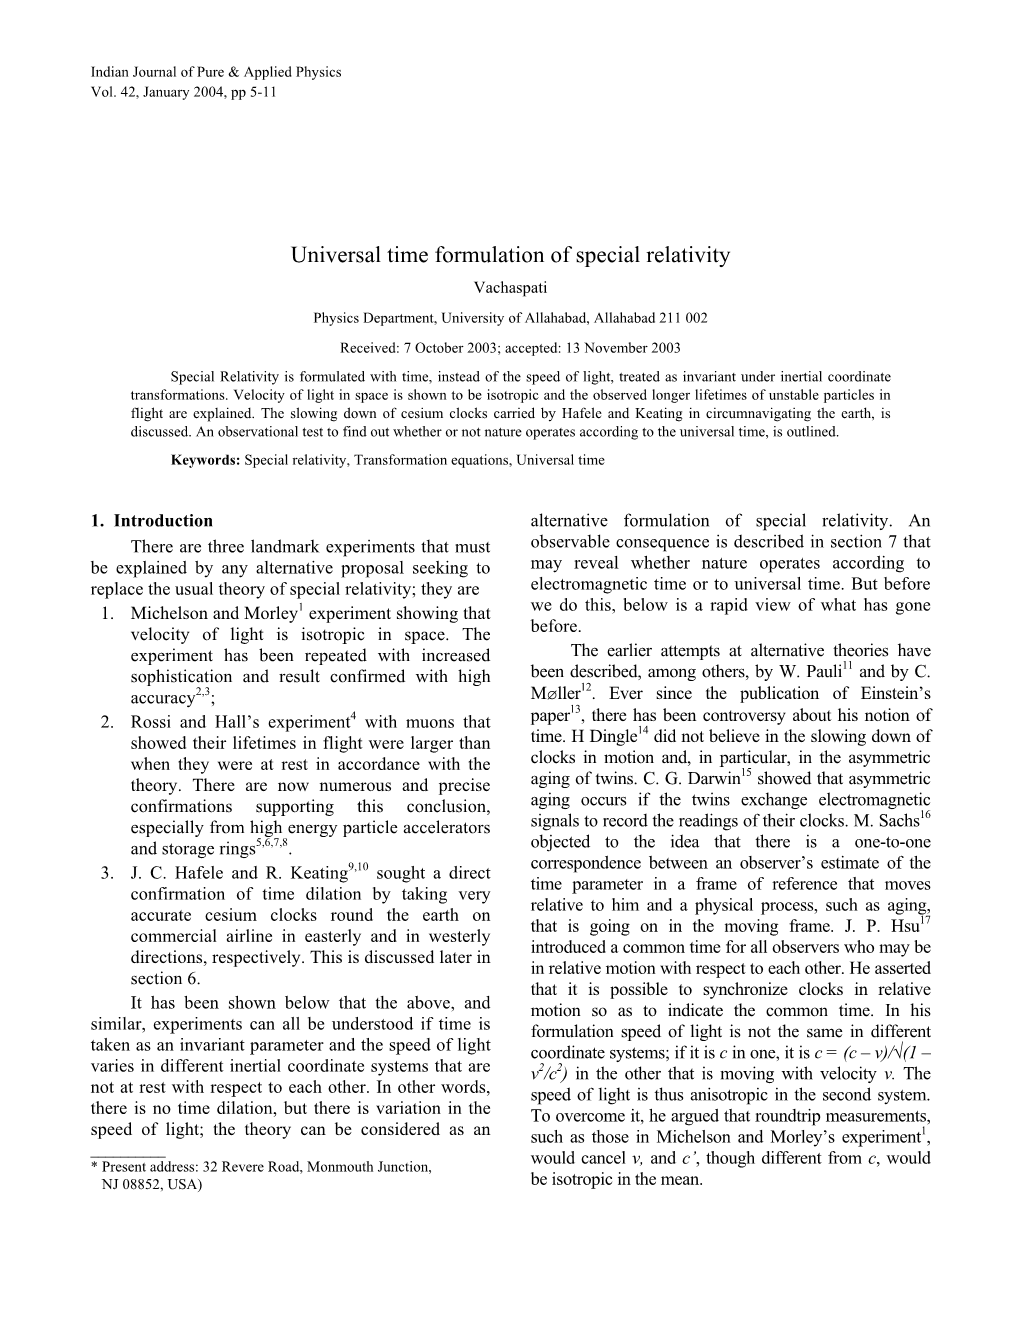 Universal Time Formulation of Special Relativity